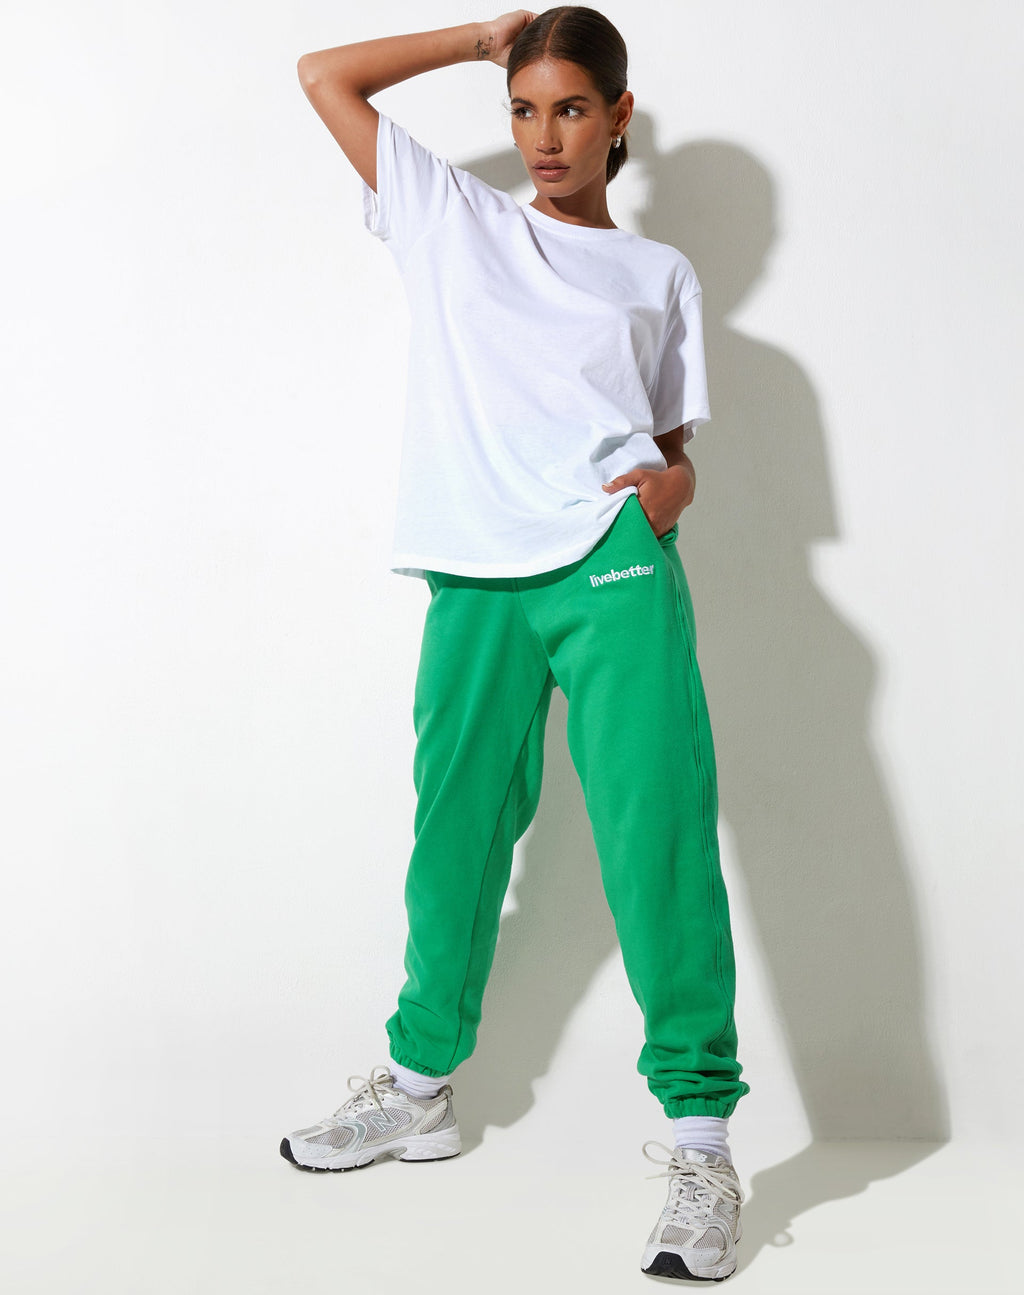 Basta Jogger in Fun Green with 'Live Better' Embro